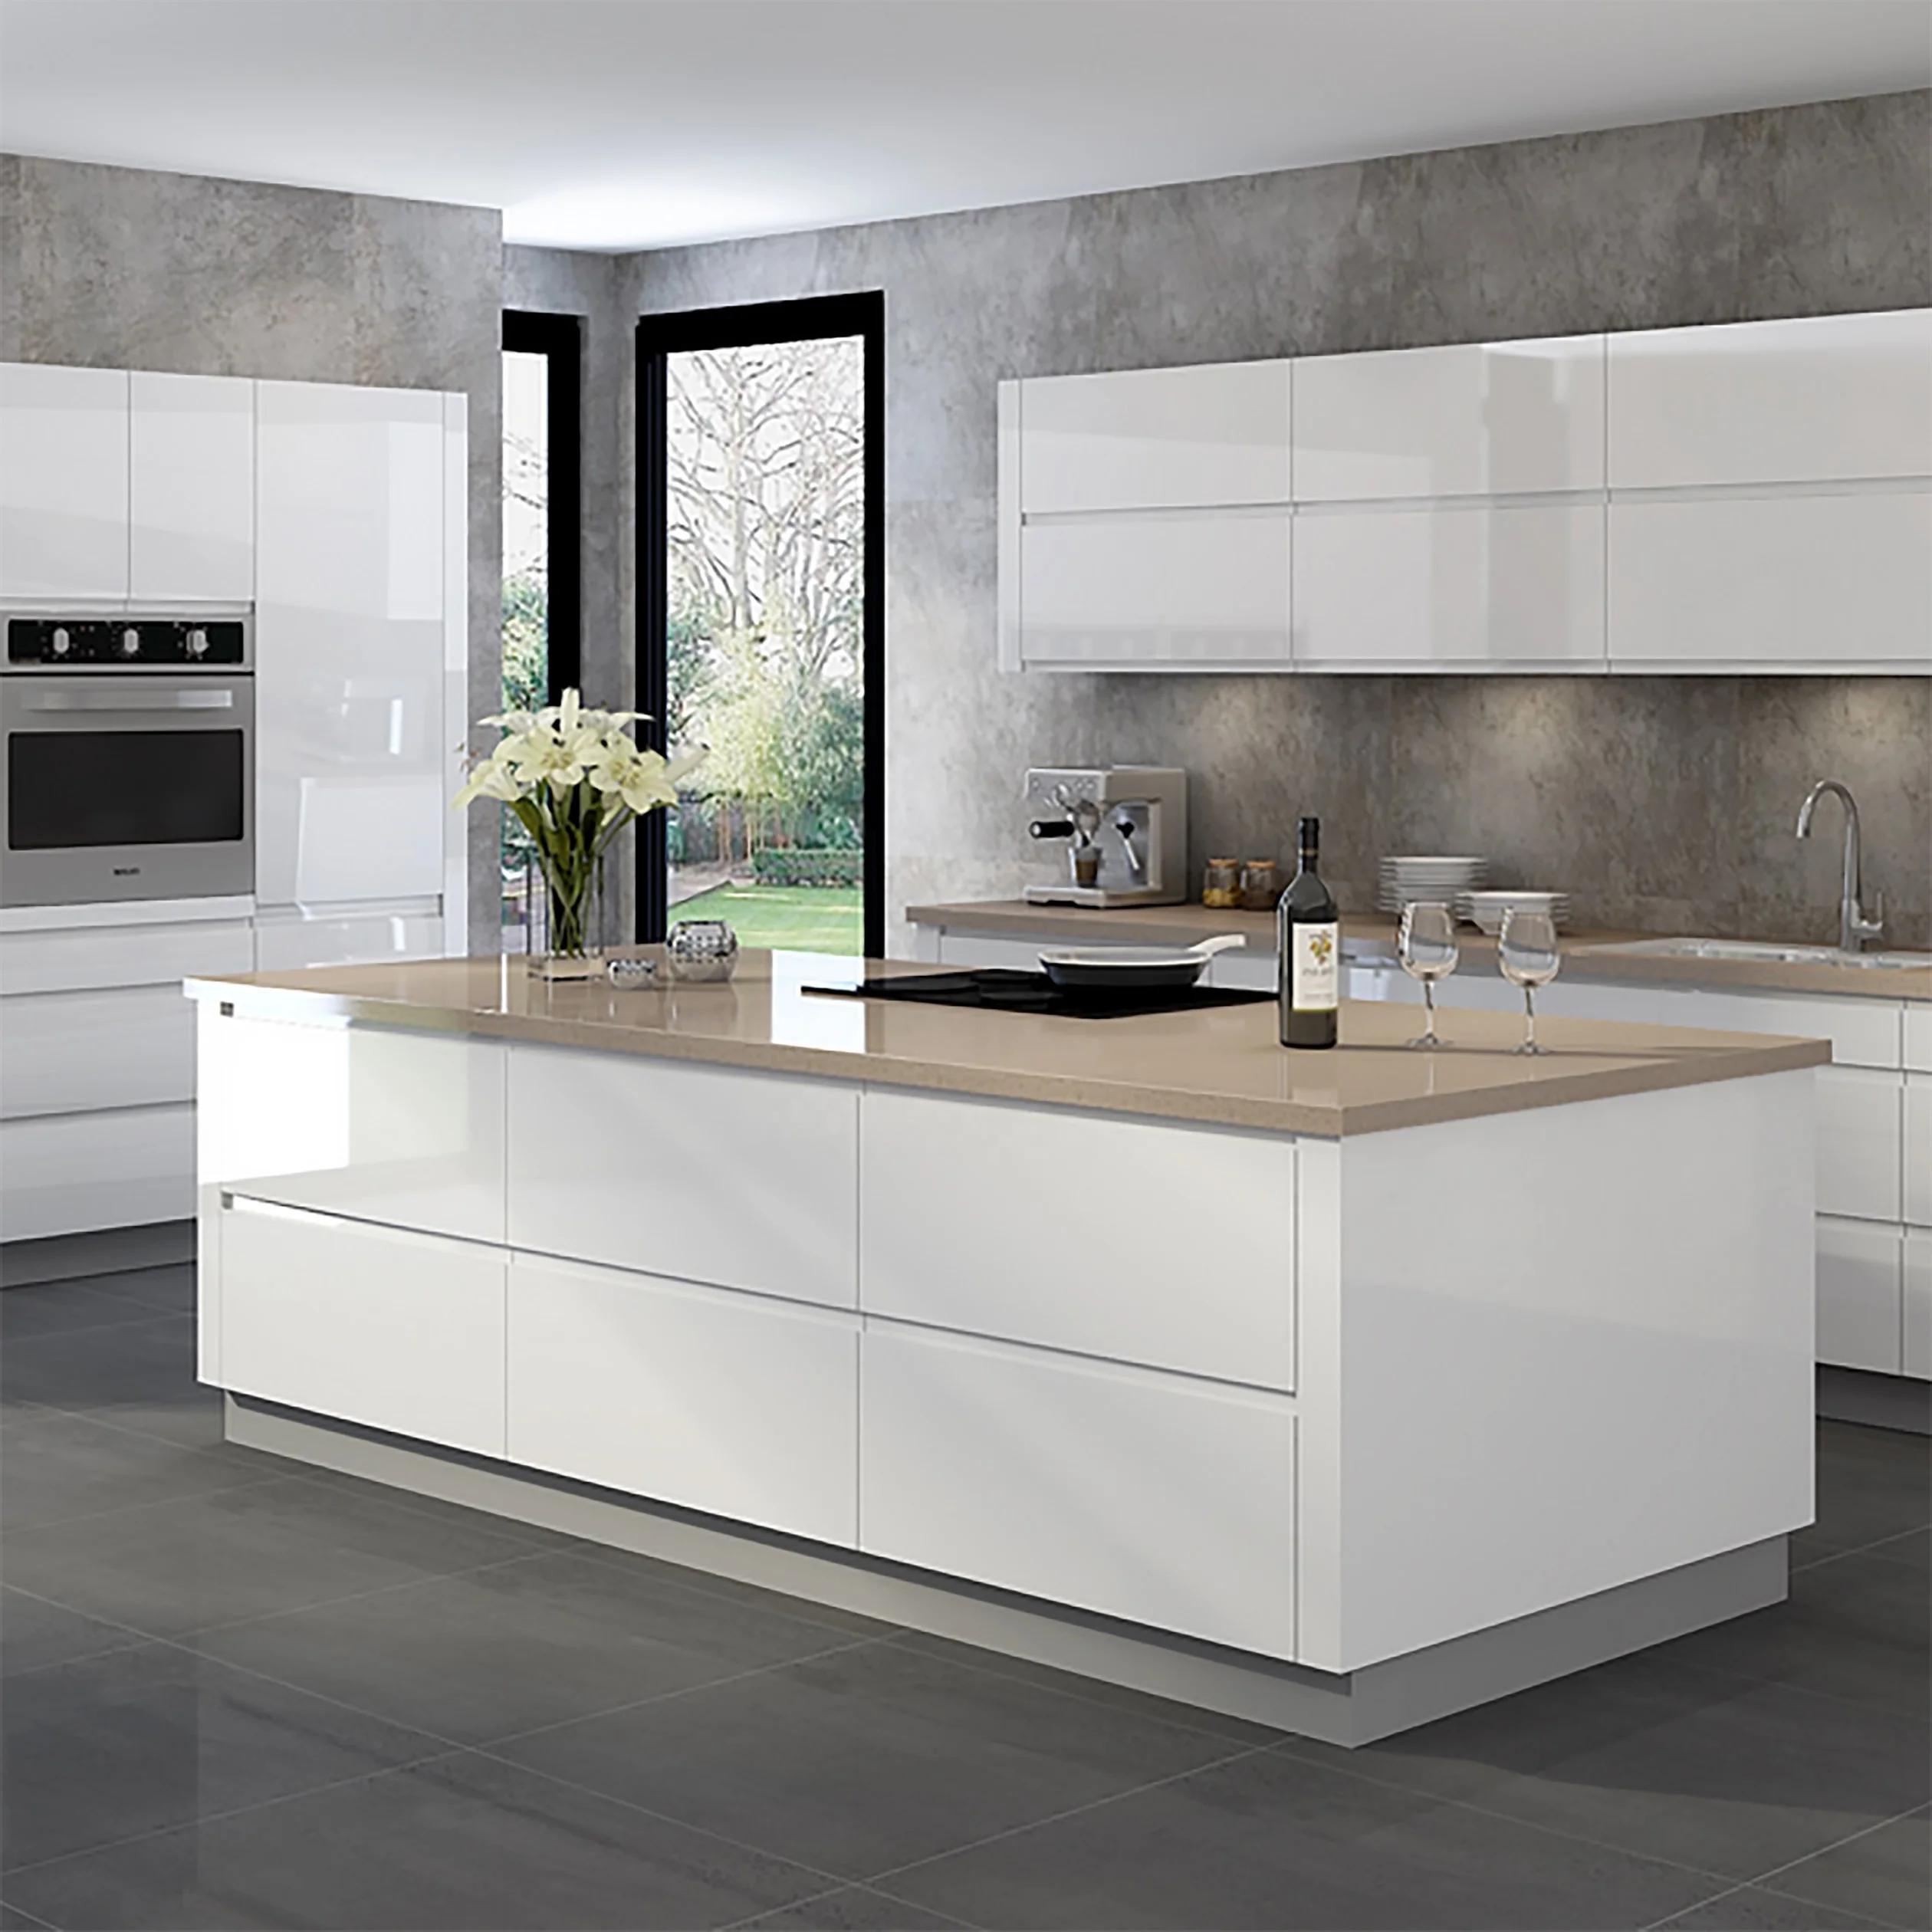 Modern Style Modular Luxury White Lacquer Kitchens Designs - Buy Kitchen  Design Modern Style,Modern Kitchen Designs,Modular Modern Kitchen Product  on Alibaba.com